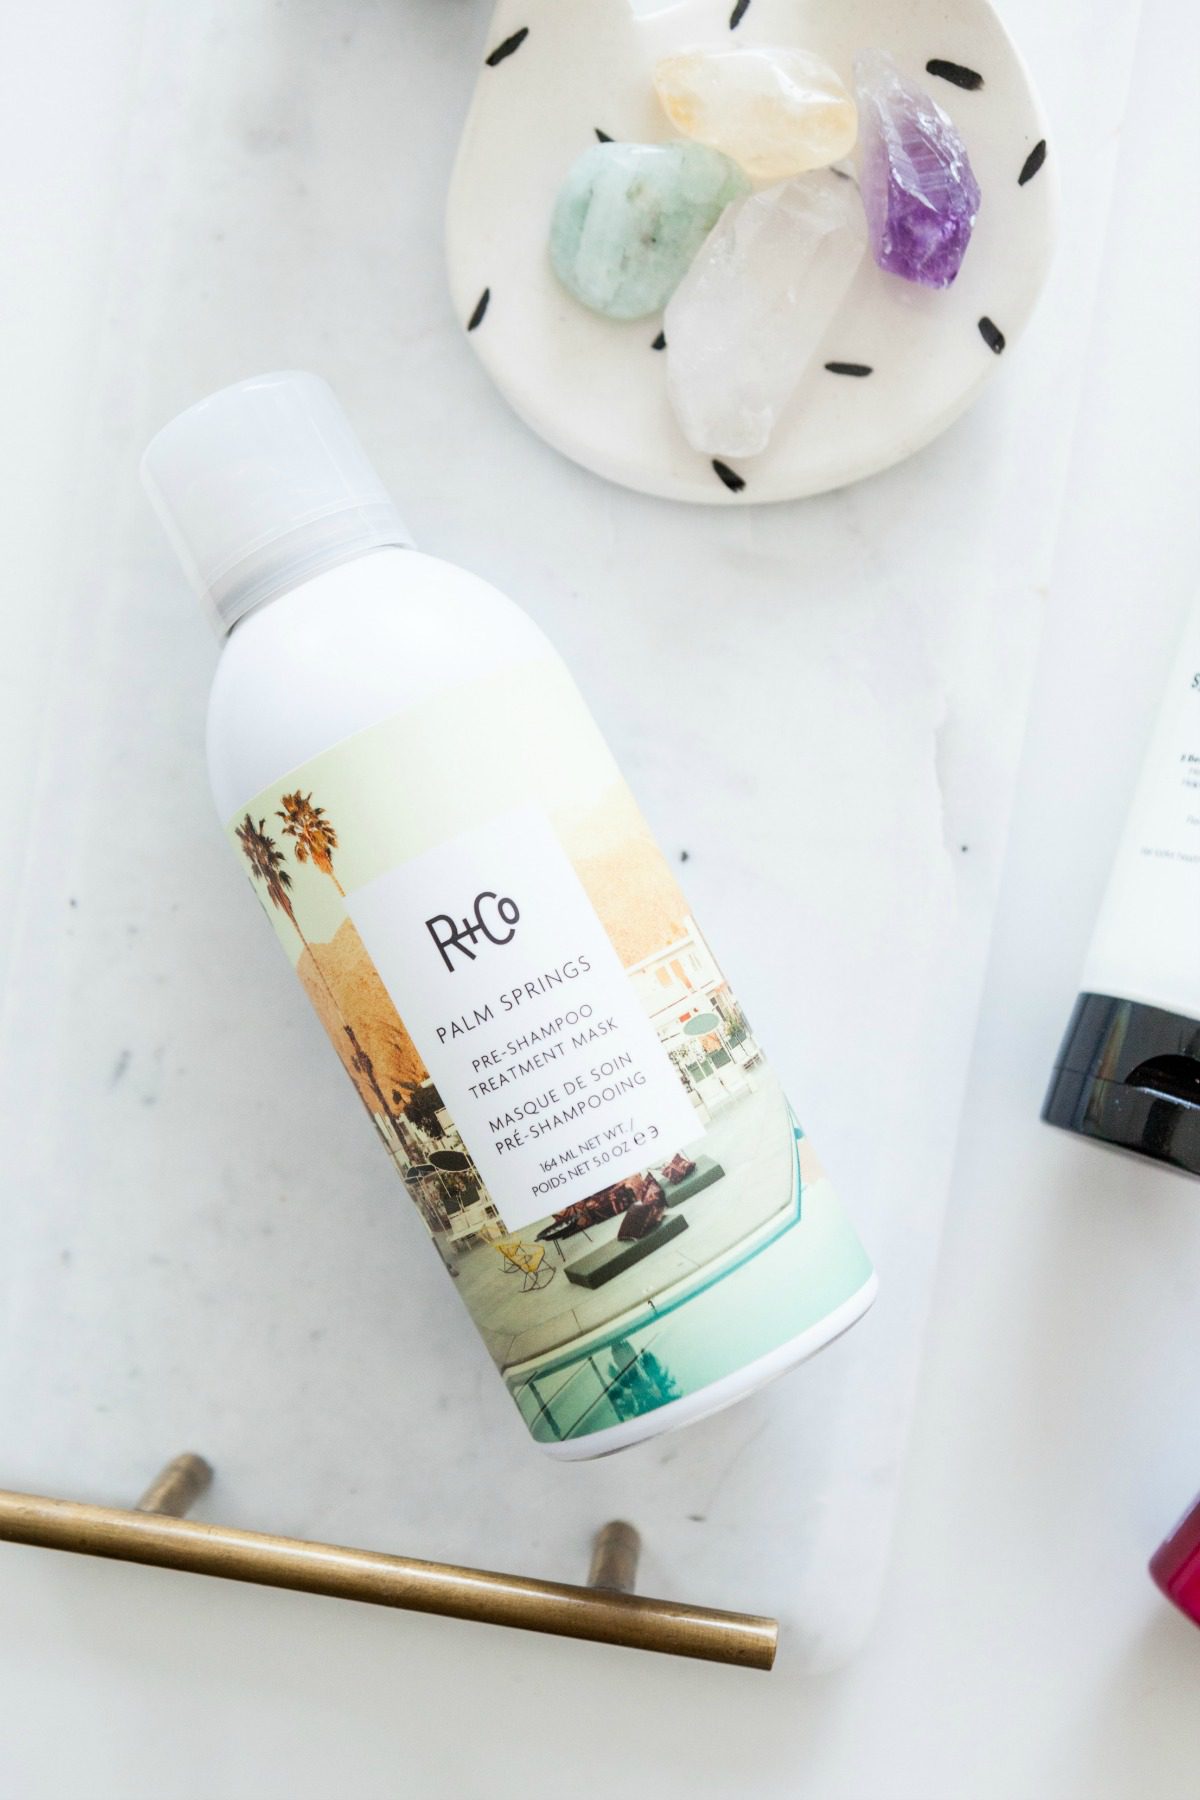 R+Co. Palm Springs Pre-Shampoo Treatment Mask to protect your hair